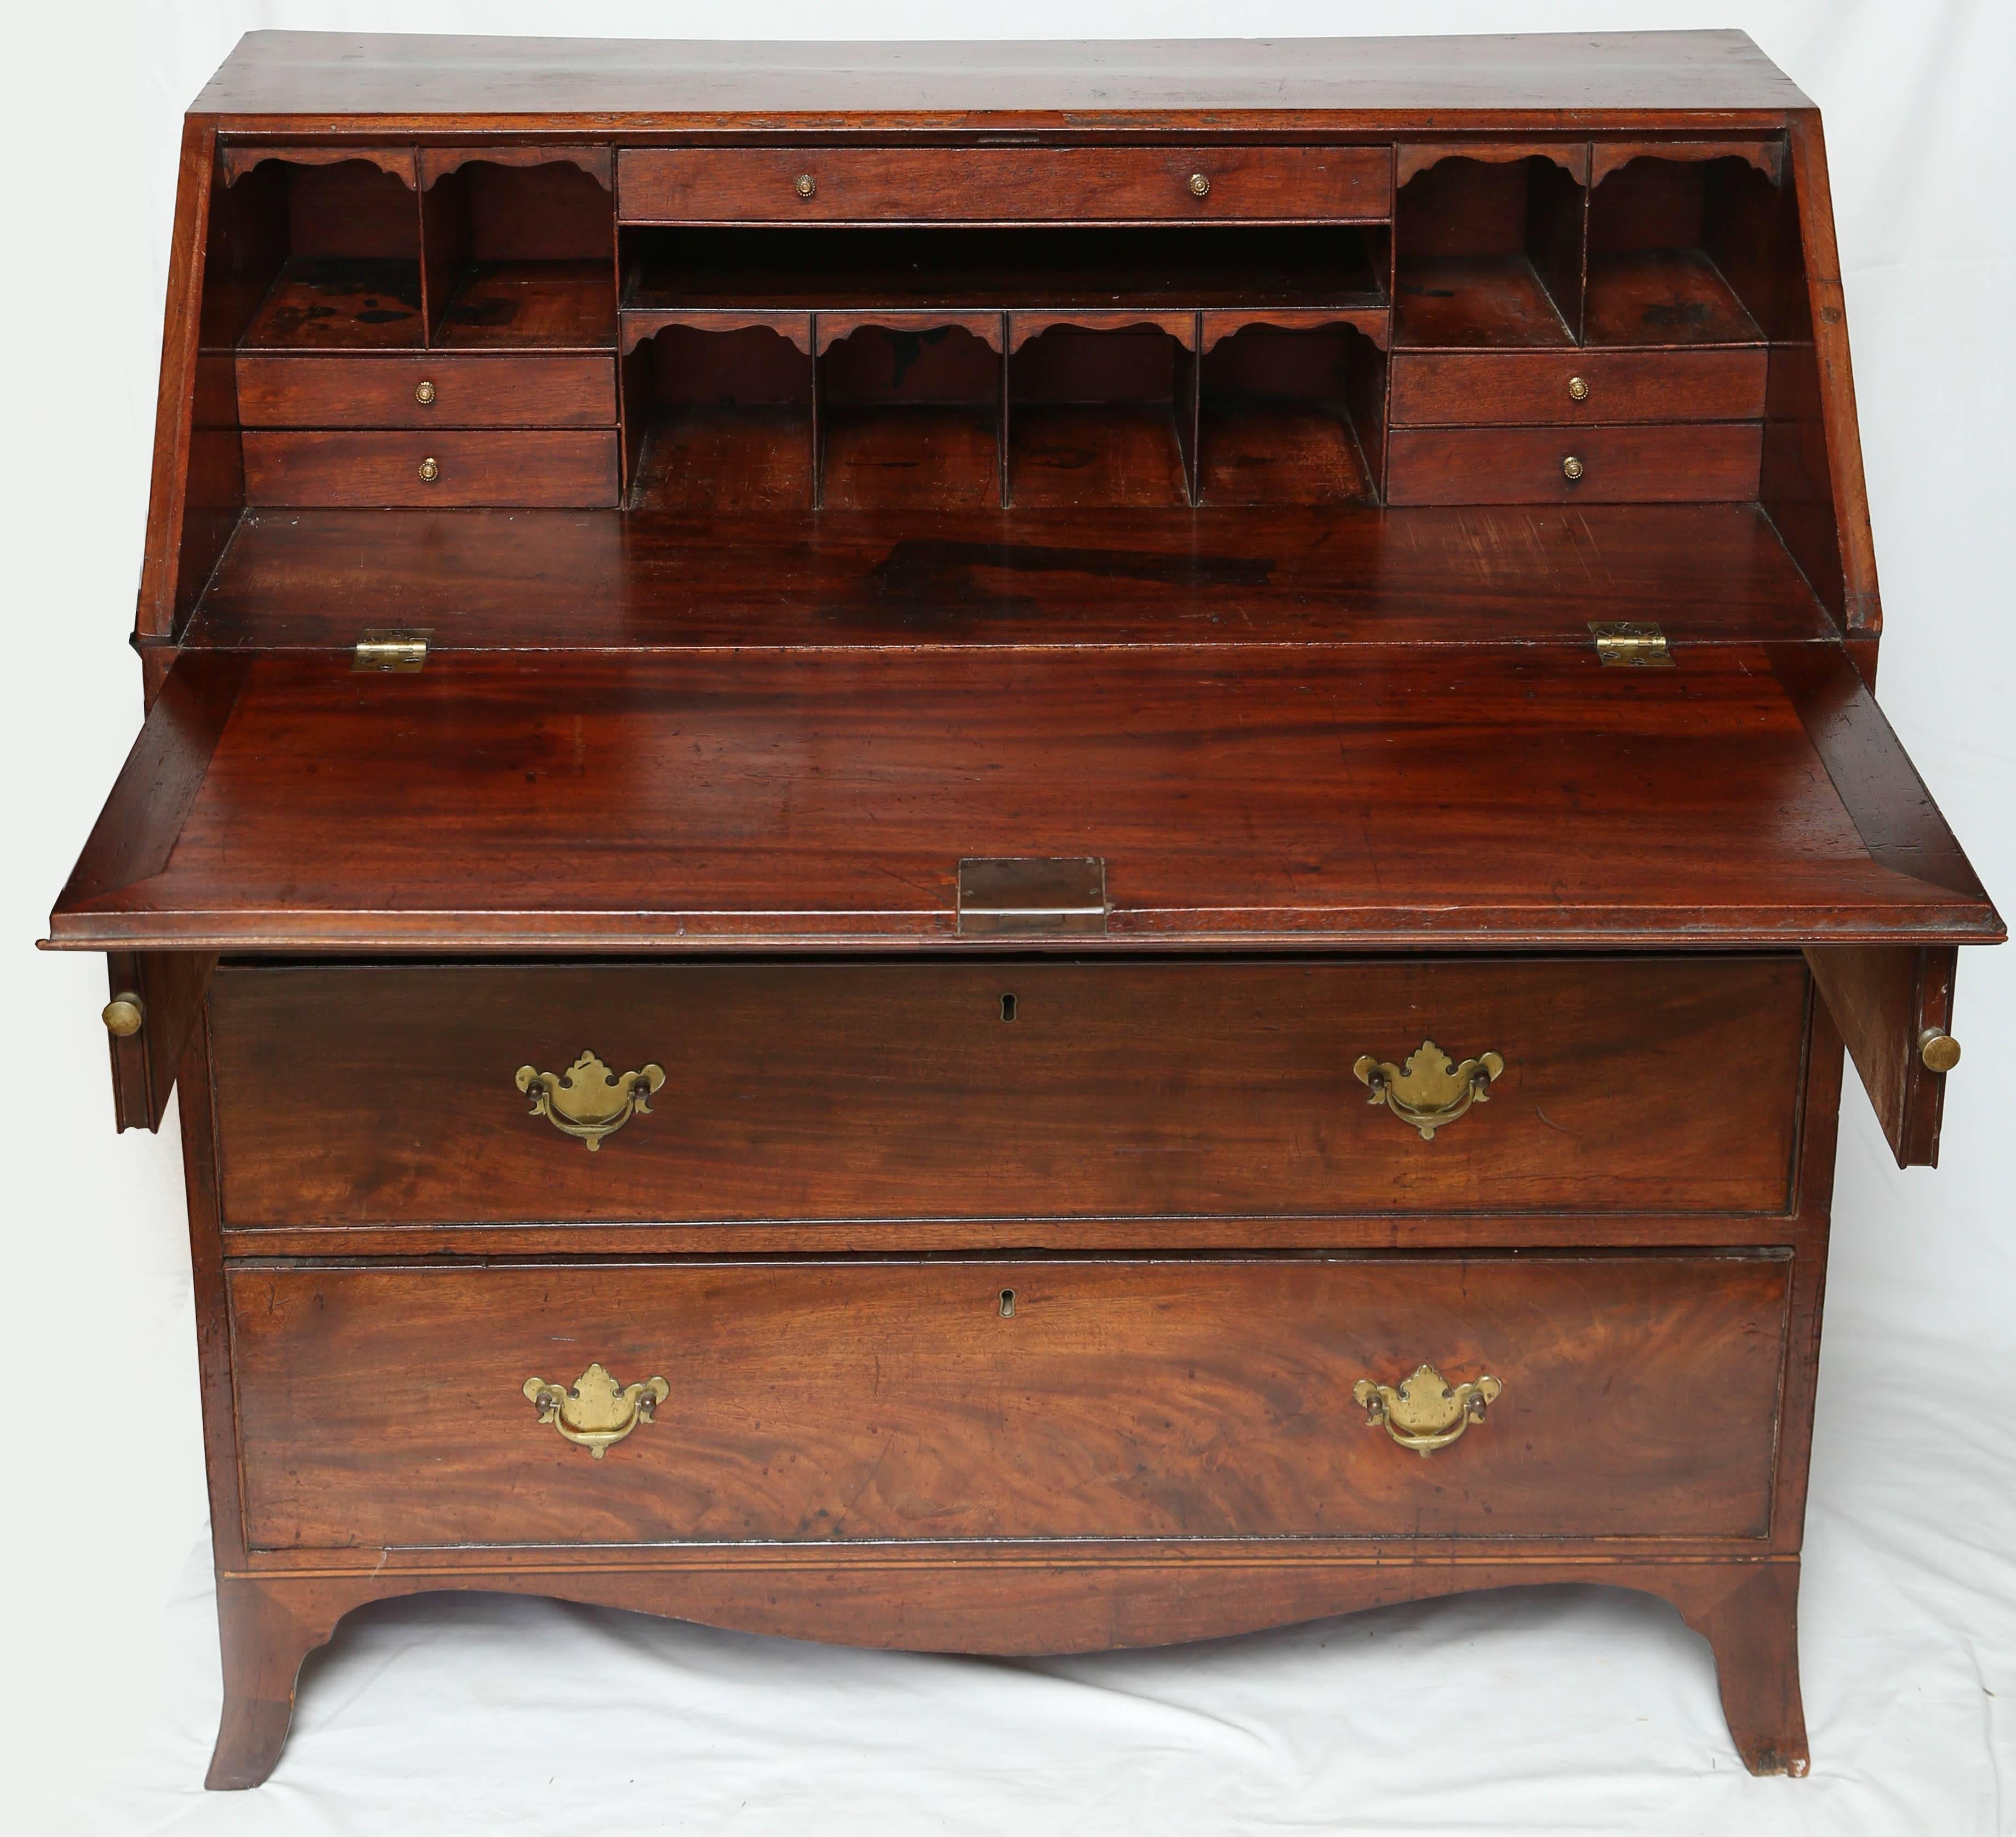 This is a very nice early Georgian bureau circa 1860 made in England. It sits on bracket feet, either side are pulls to support the flap. All the drawer lining are solid oak with dovetail joints. Inside its fitted with drawers and letter